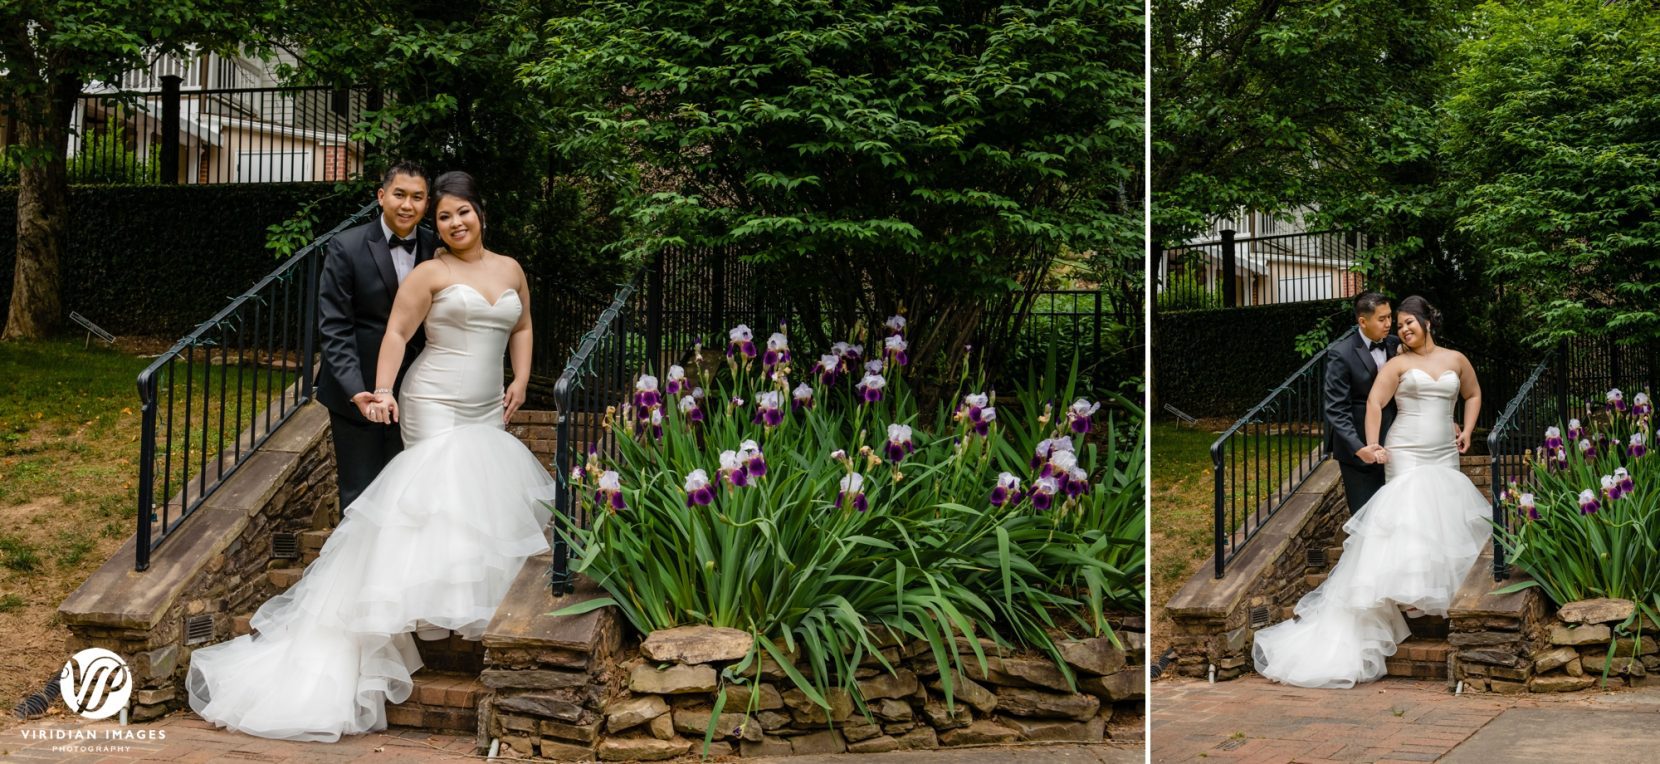 bride and groom on stair in garden with purple tulips